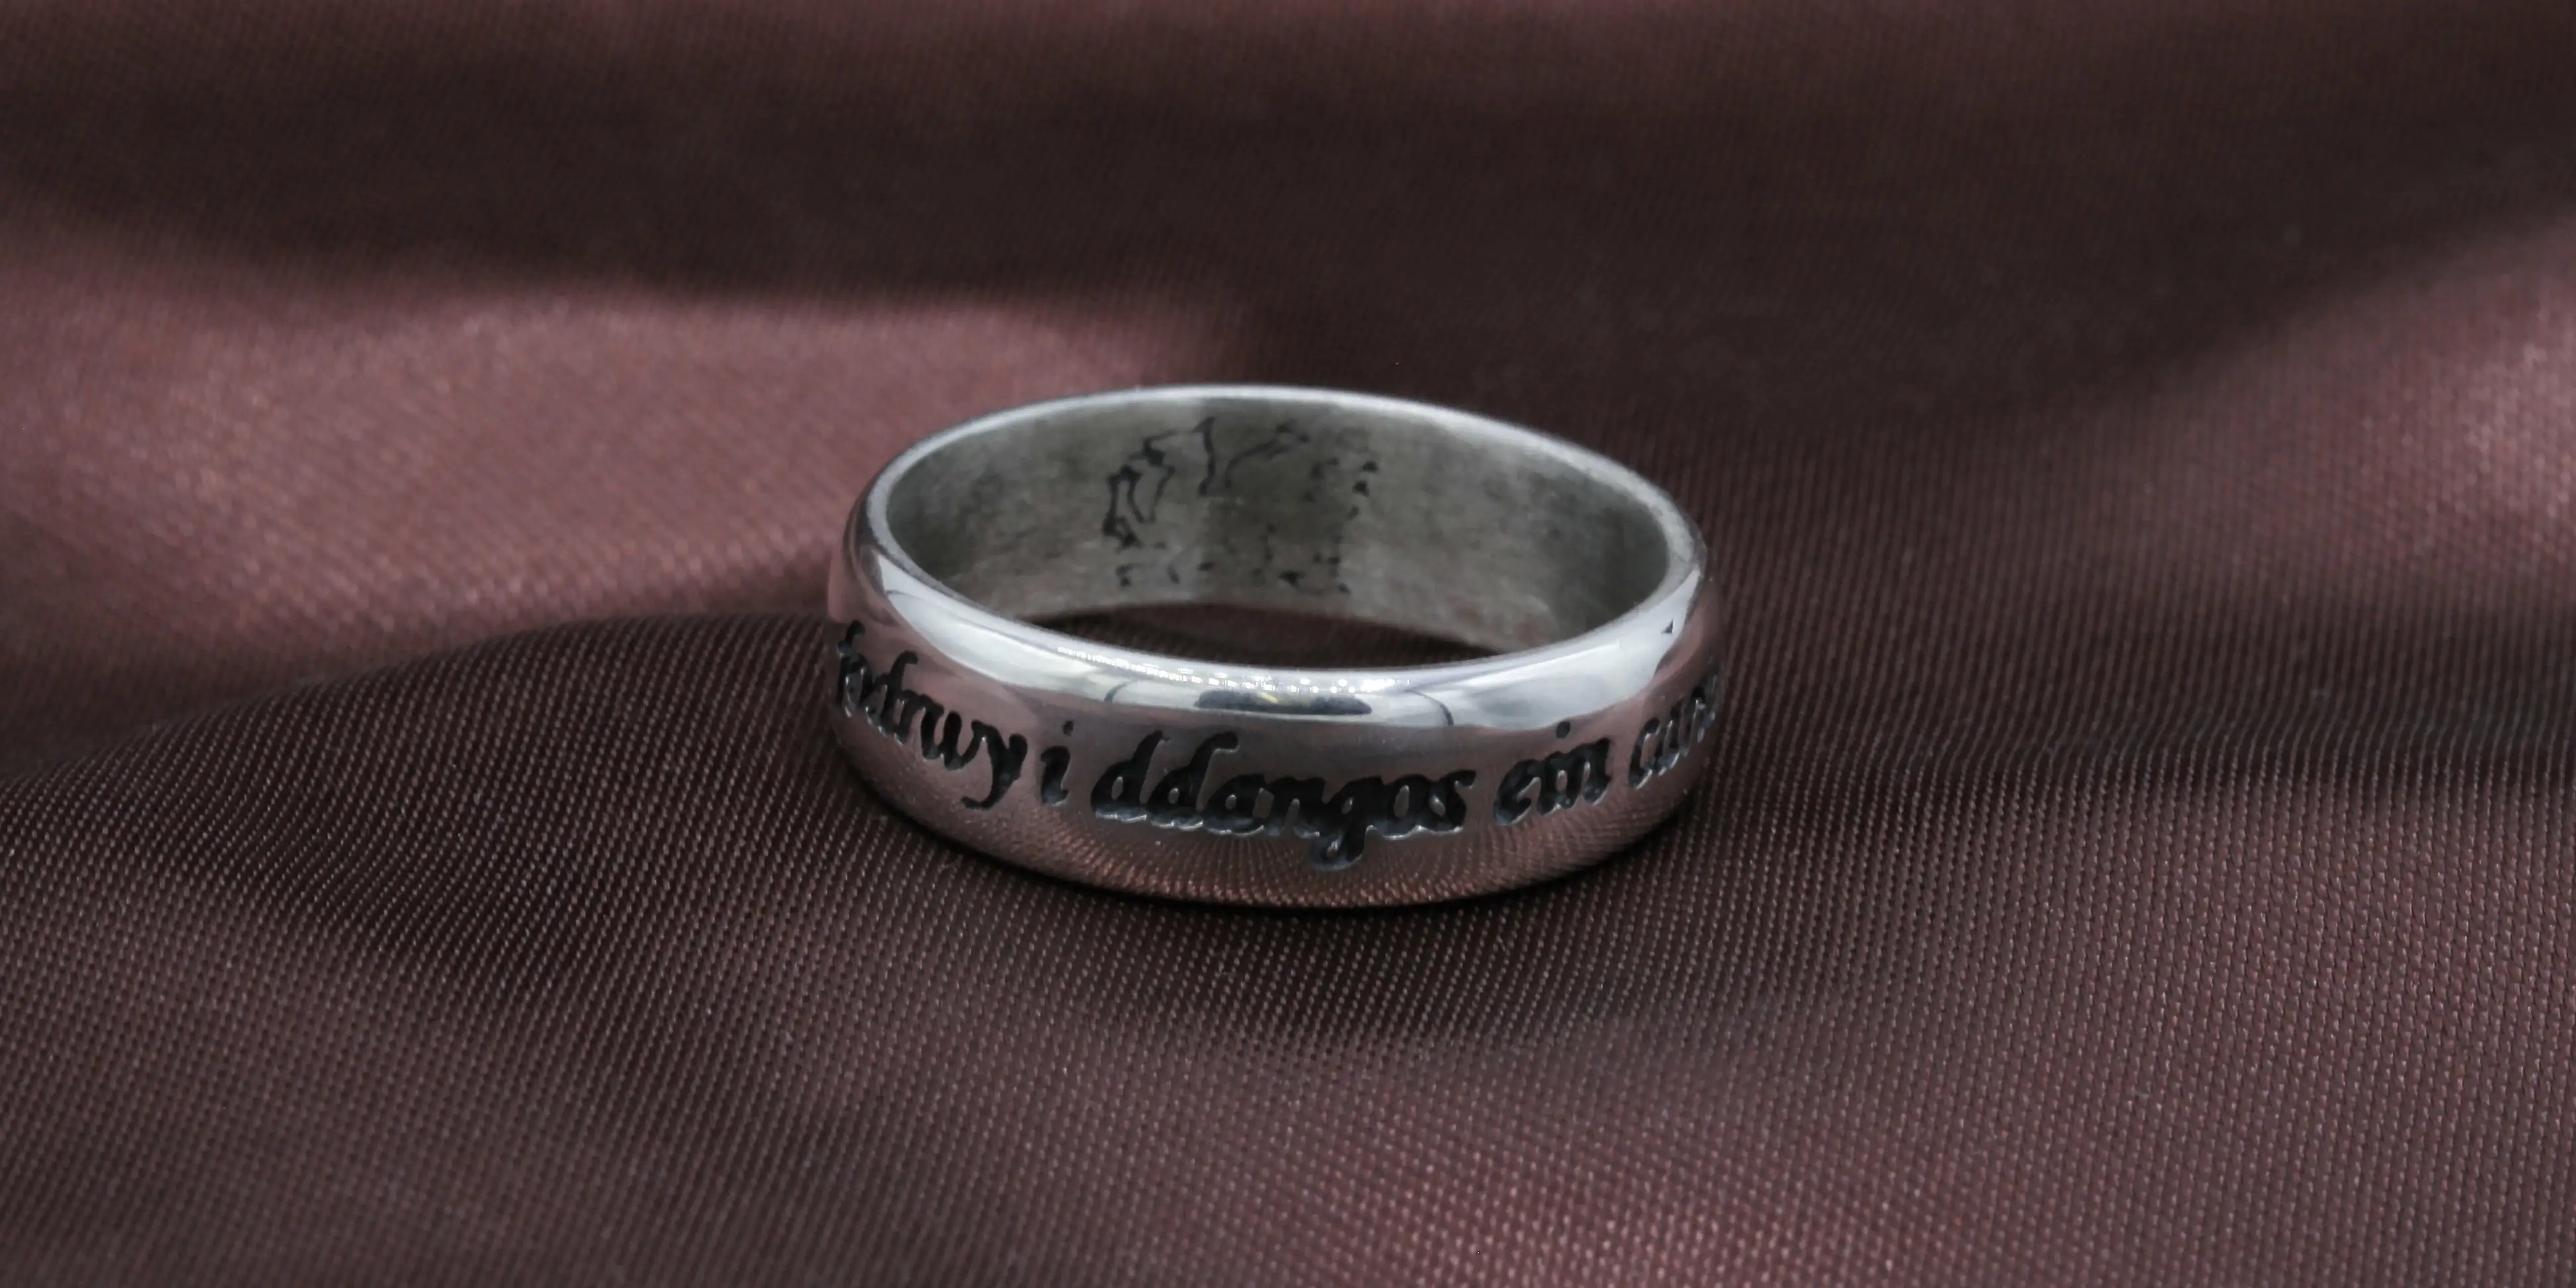 Main category image for other Jewellery depicting a ring with Welsh writing.